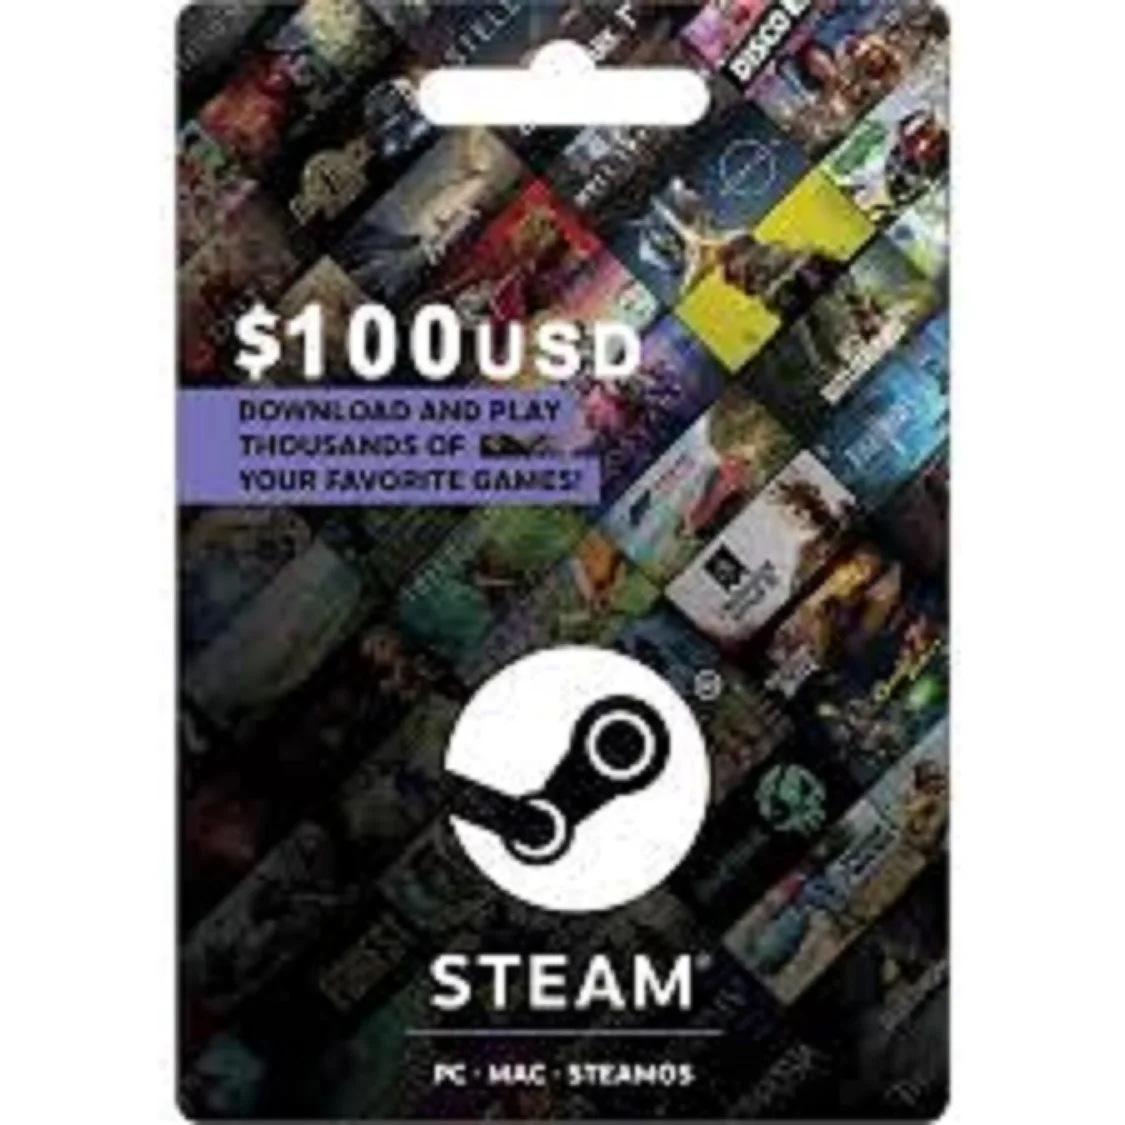 

Valve Steam $100 Wallet Gift Card STEAM WALLET Email Delivery